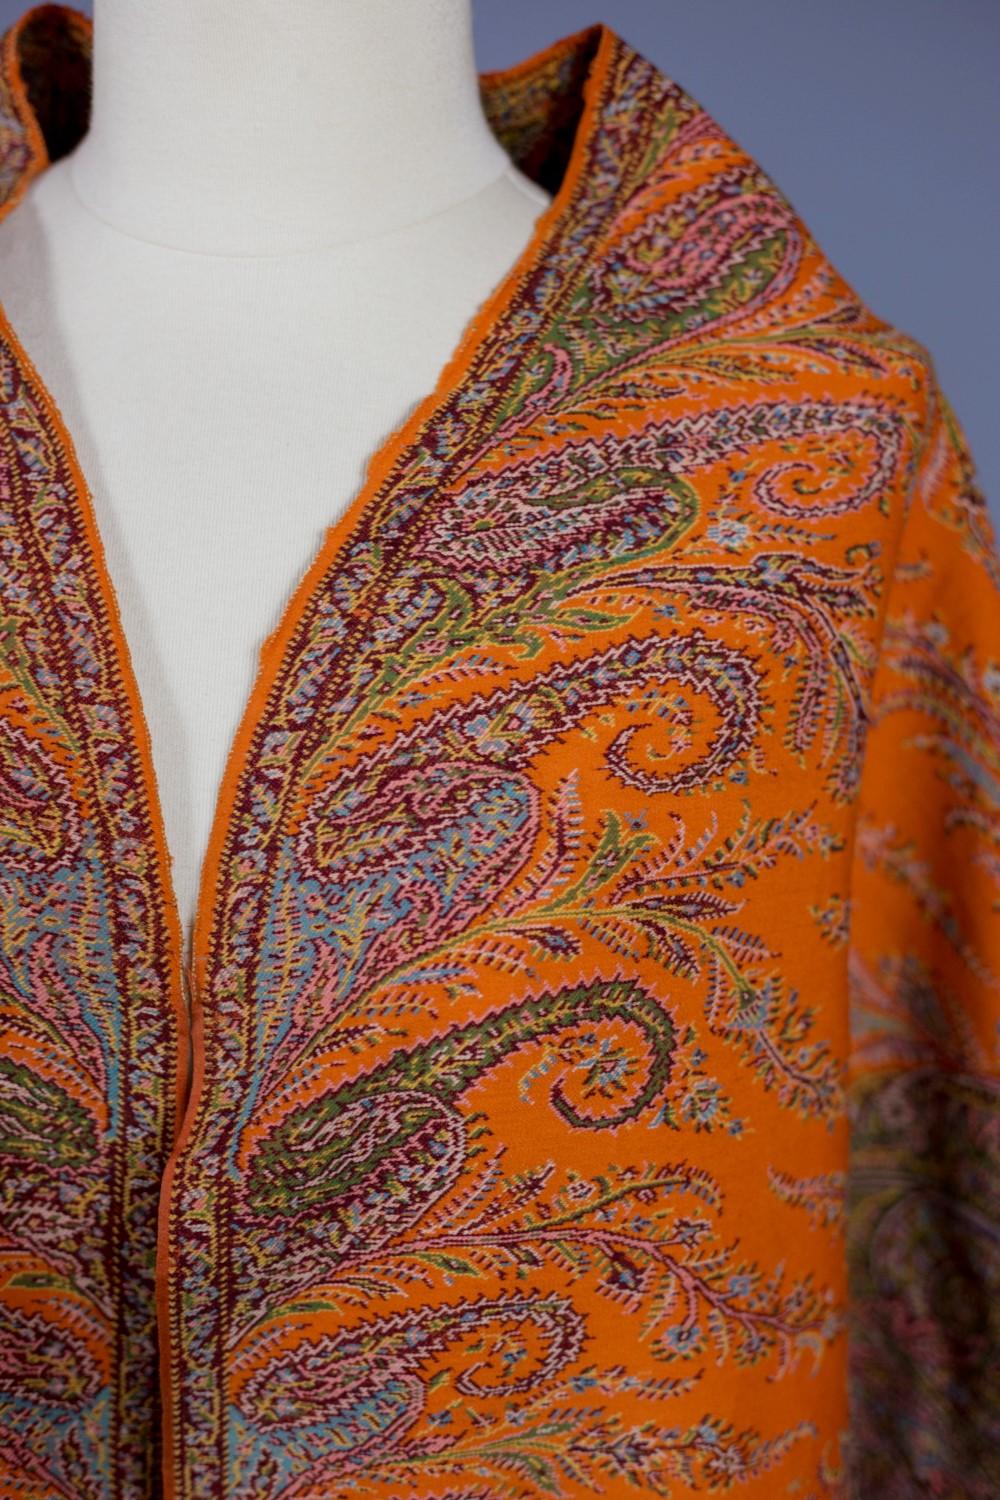 Orange Cashmere Woollen Paisley Stole Shawl - France Circa 1850 In Good Condition For Sale In Toulon, FR